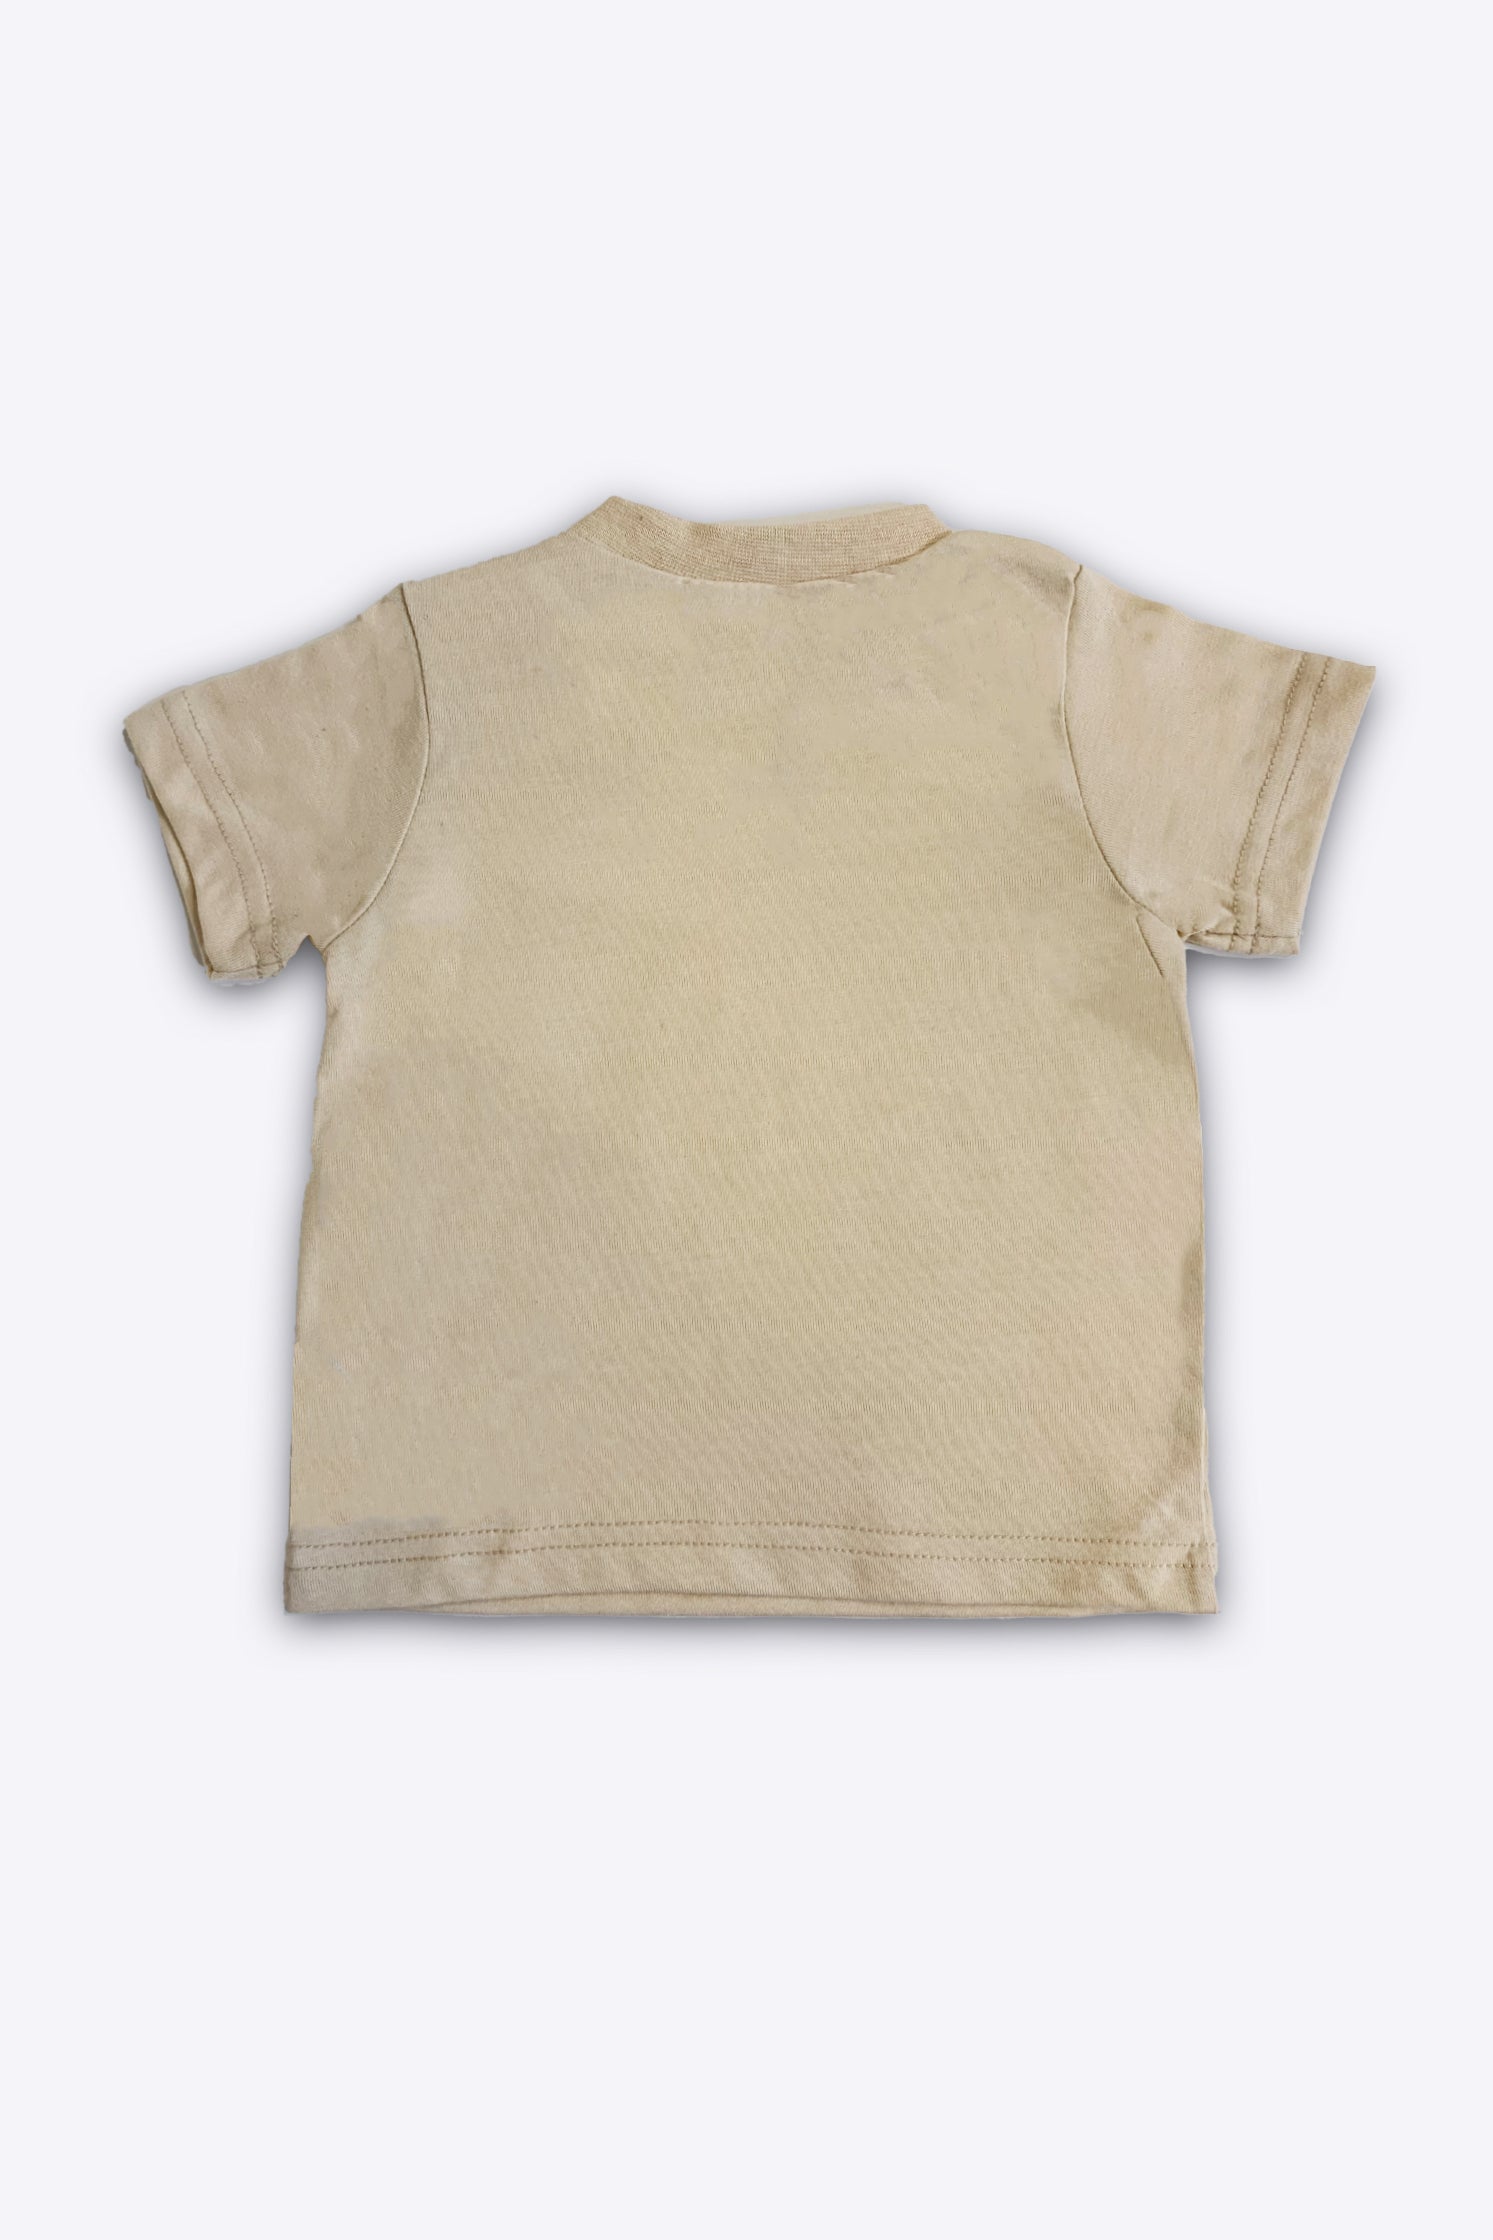 BABY T-SHIRT BEIGE FRONT "SING A SONG" PRINTNG